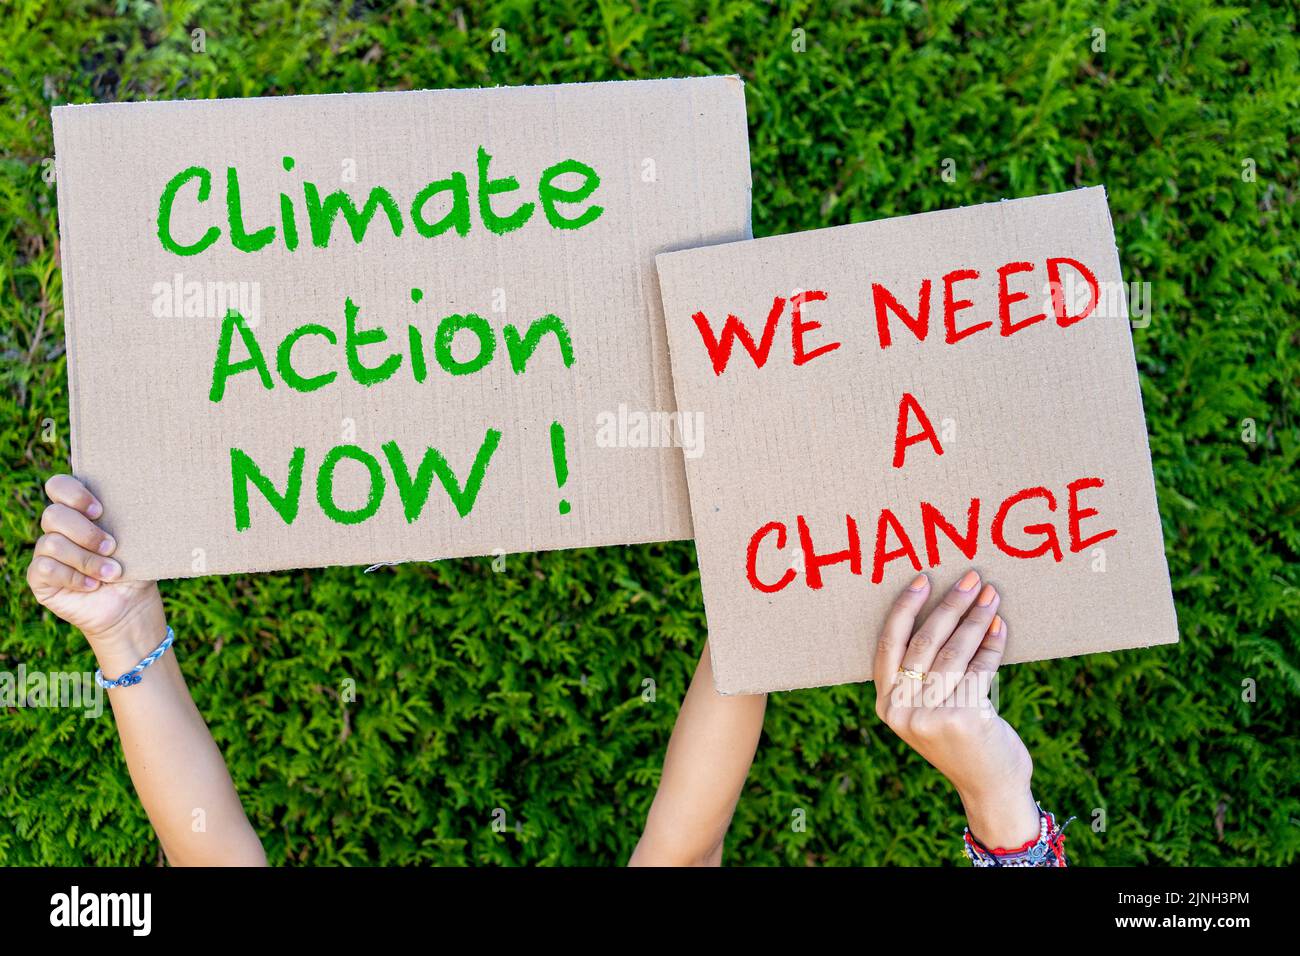 Activists with ' Save the planet' and 'We need a change' placard at climate change prostest Stock Photo